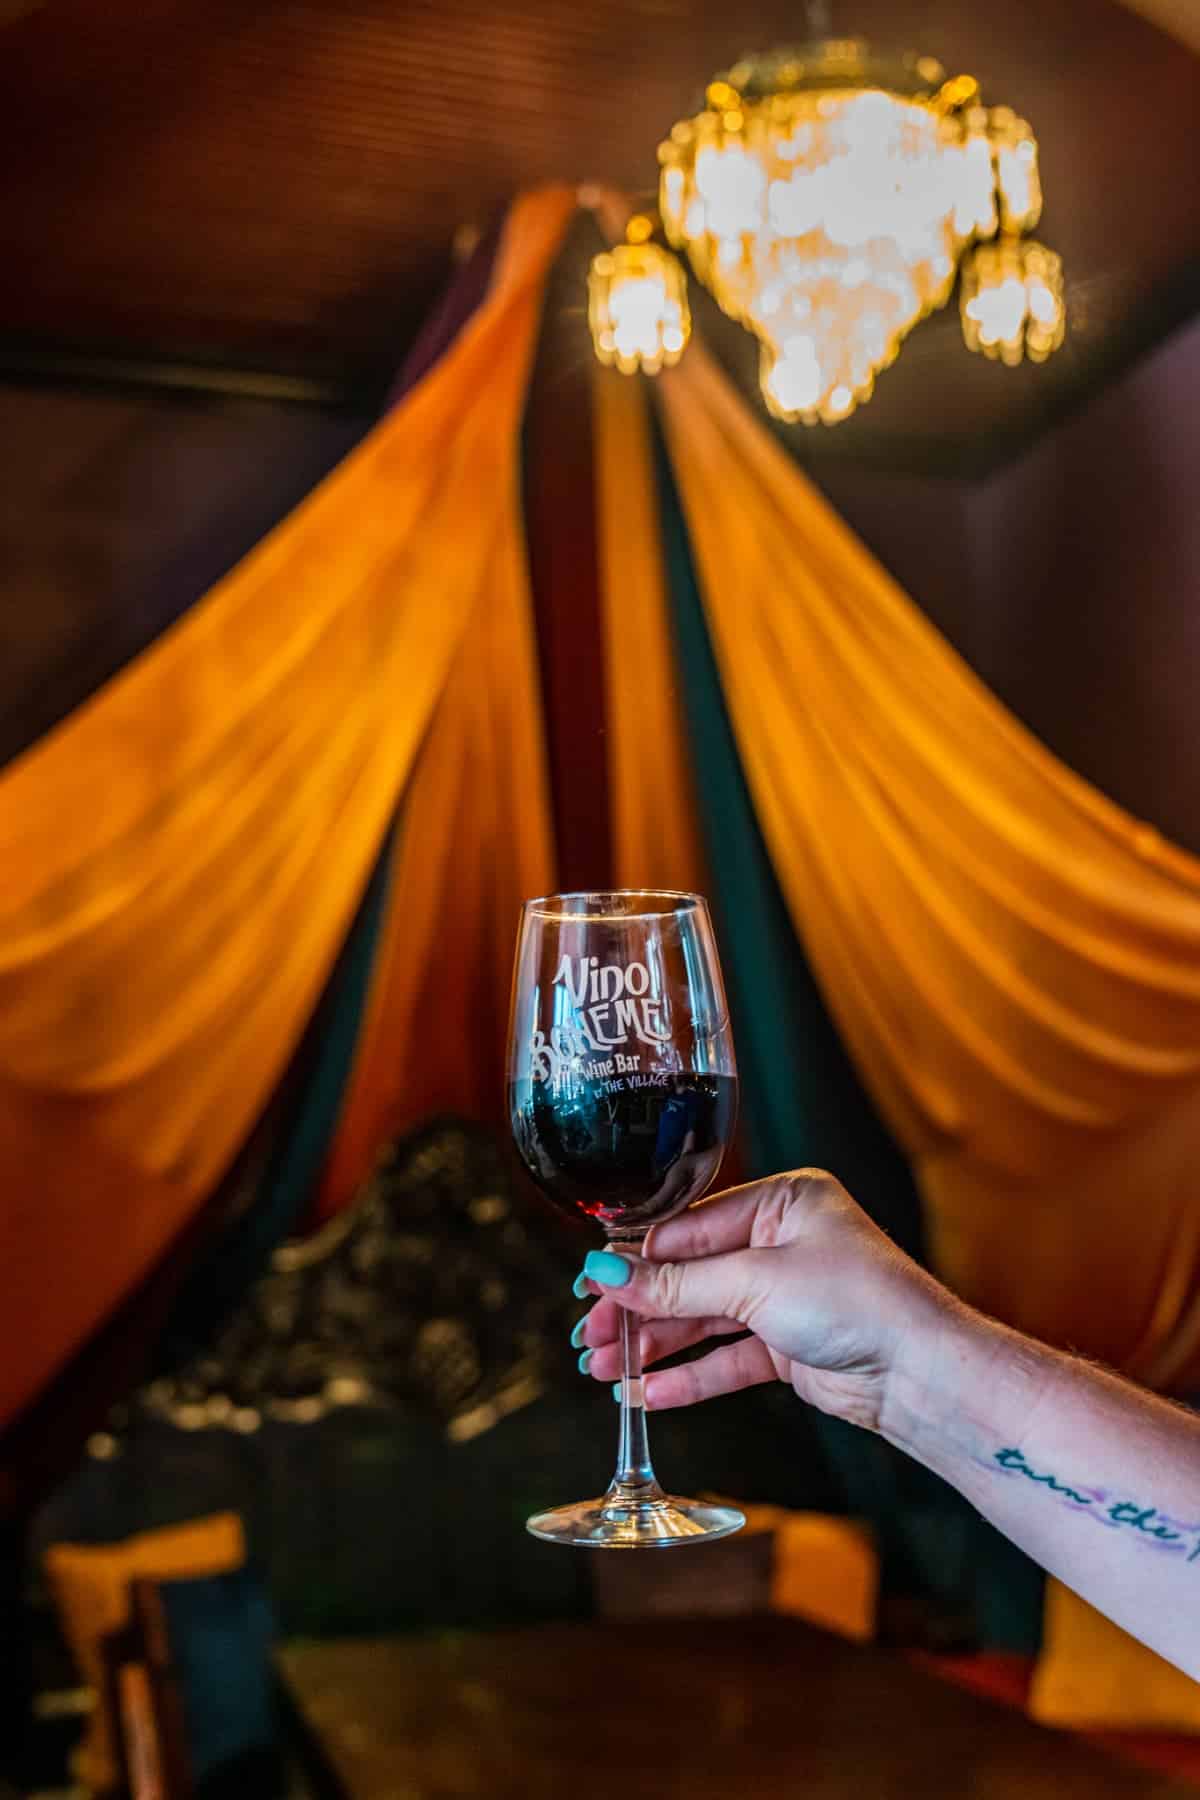 A hand holding a glass of wine in front of some yellow, red, and green curtains